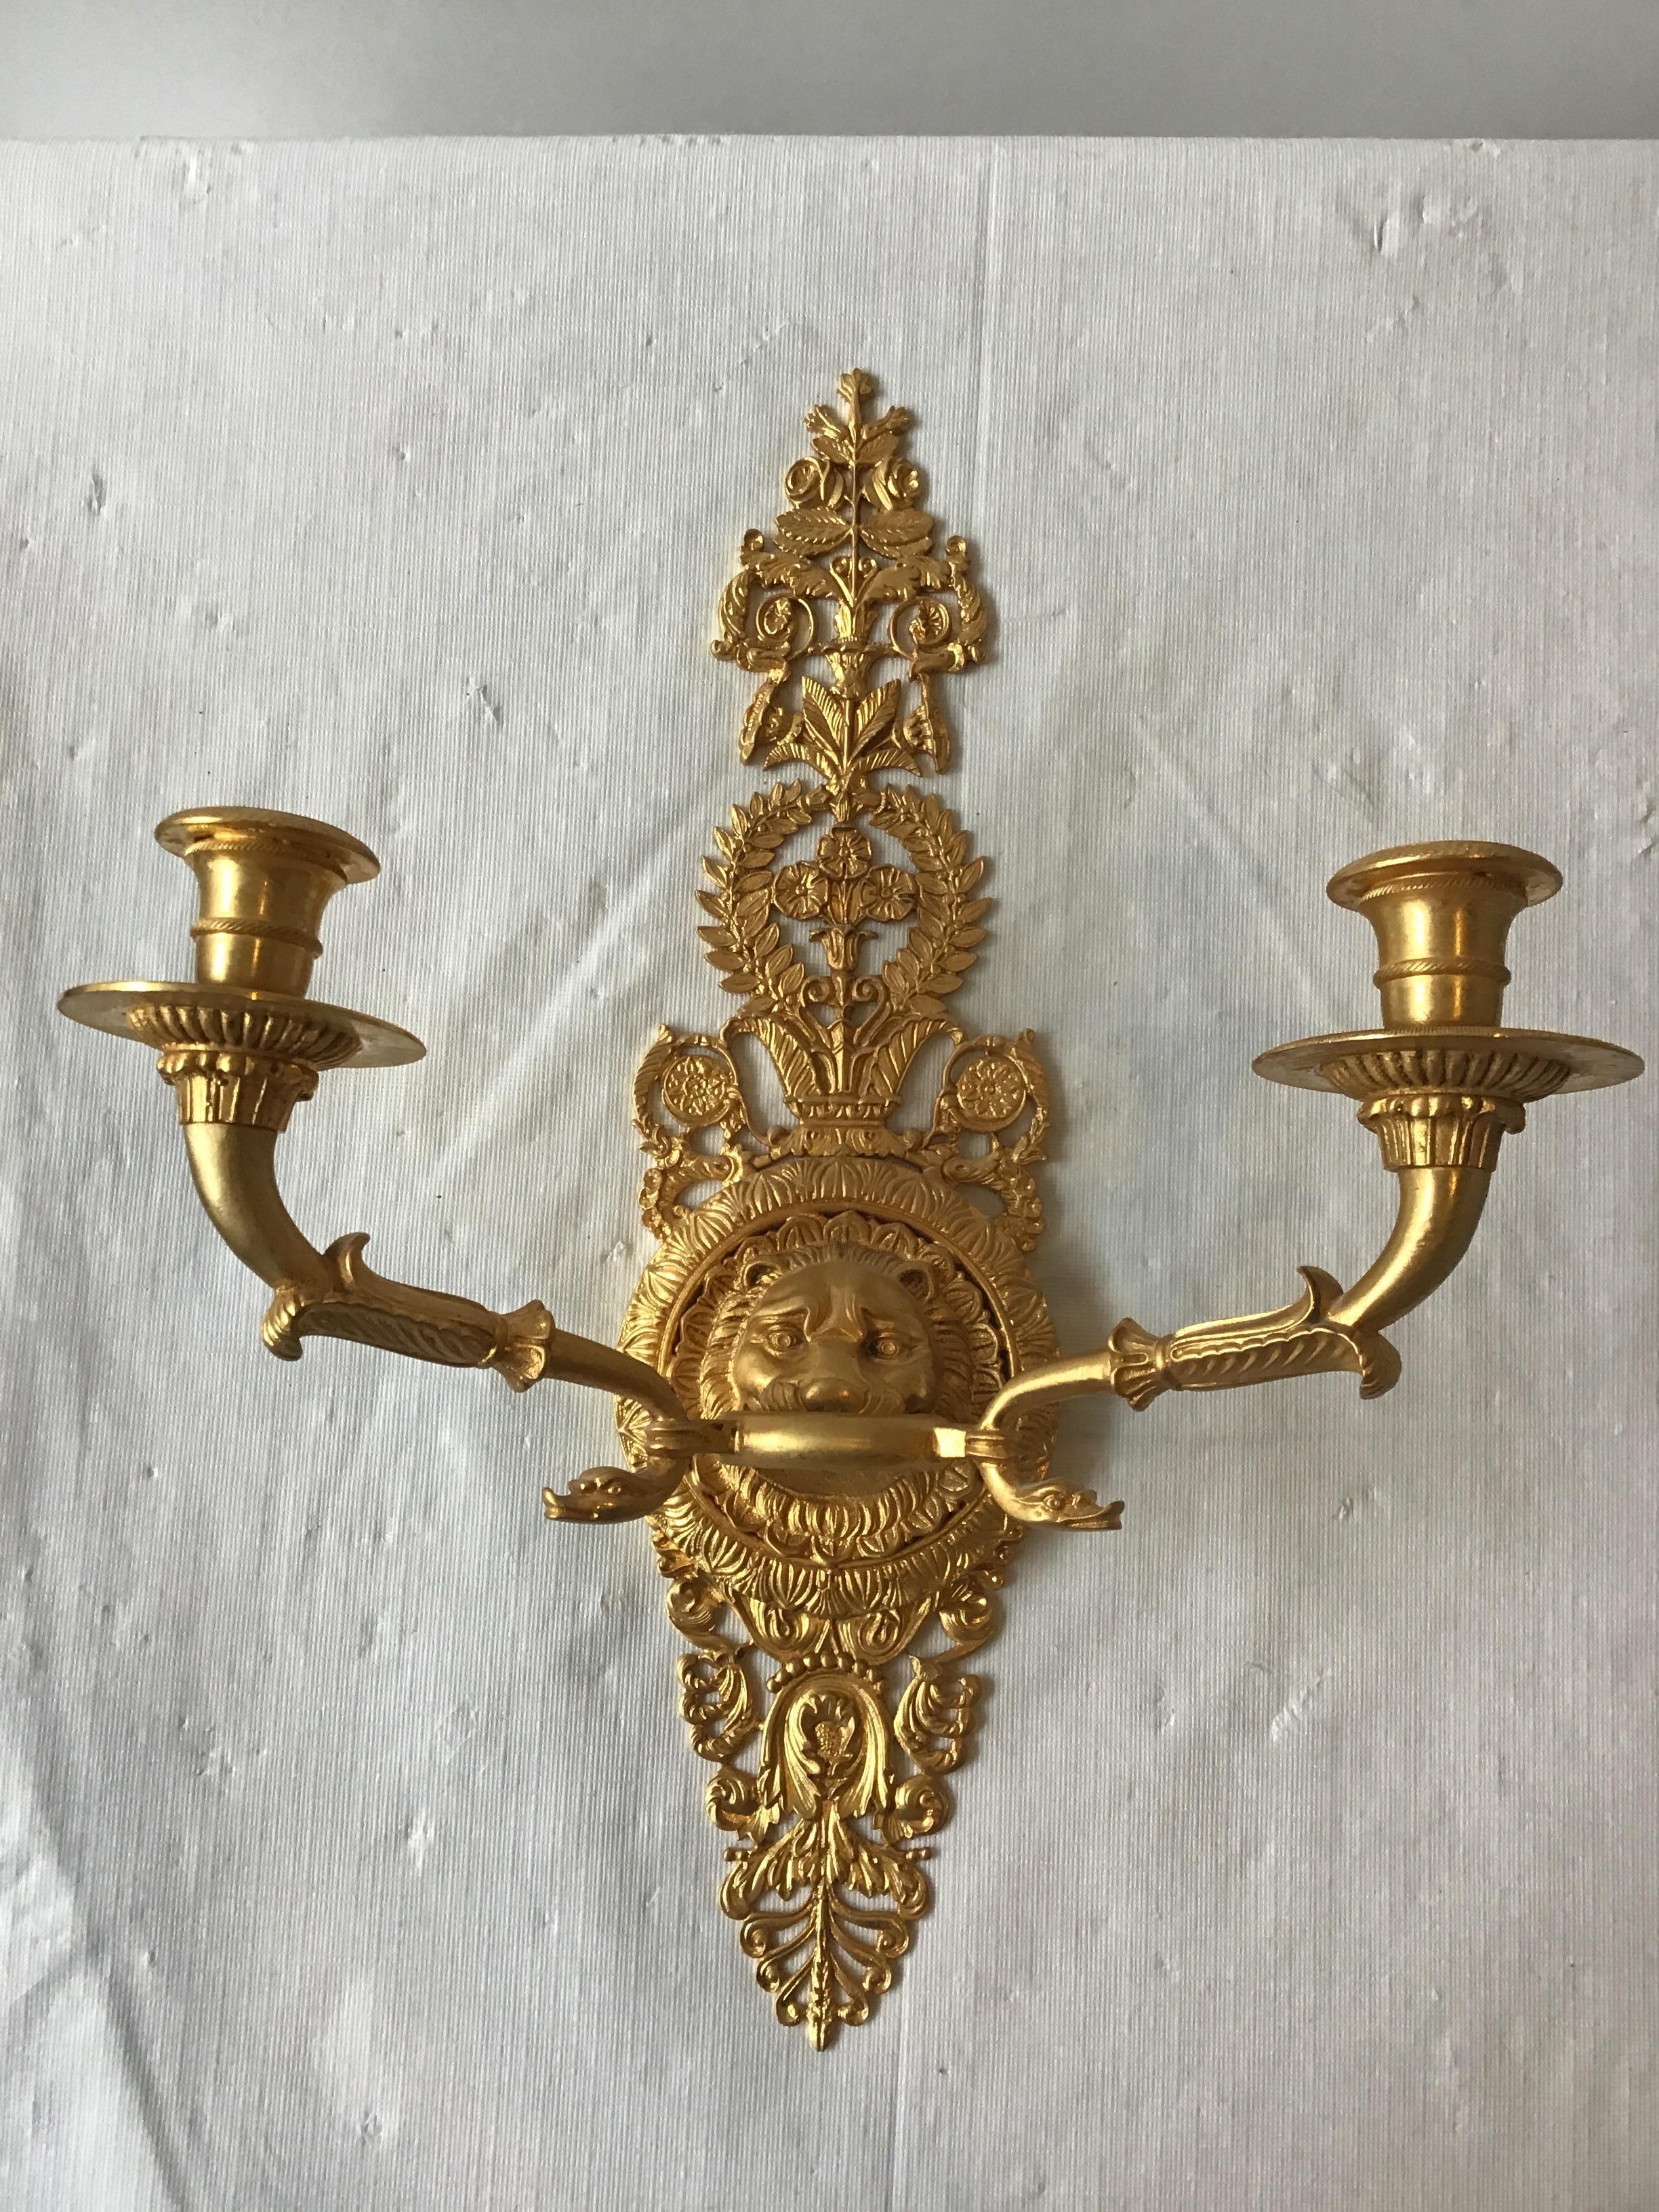 3 Versace Style Gold-Plated Lion Head Classical Sconces In Good Condition For Sale In Tarrytown, NY